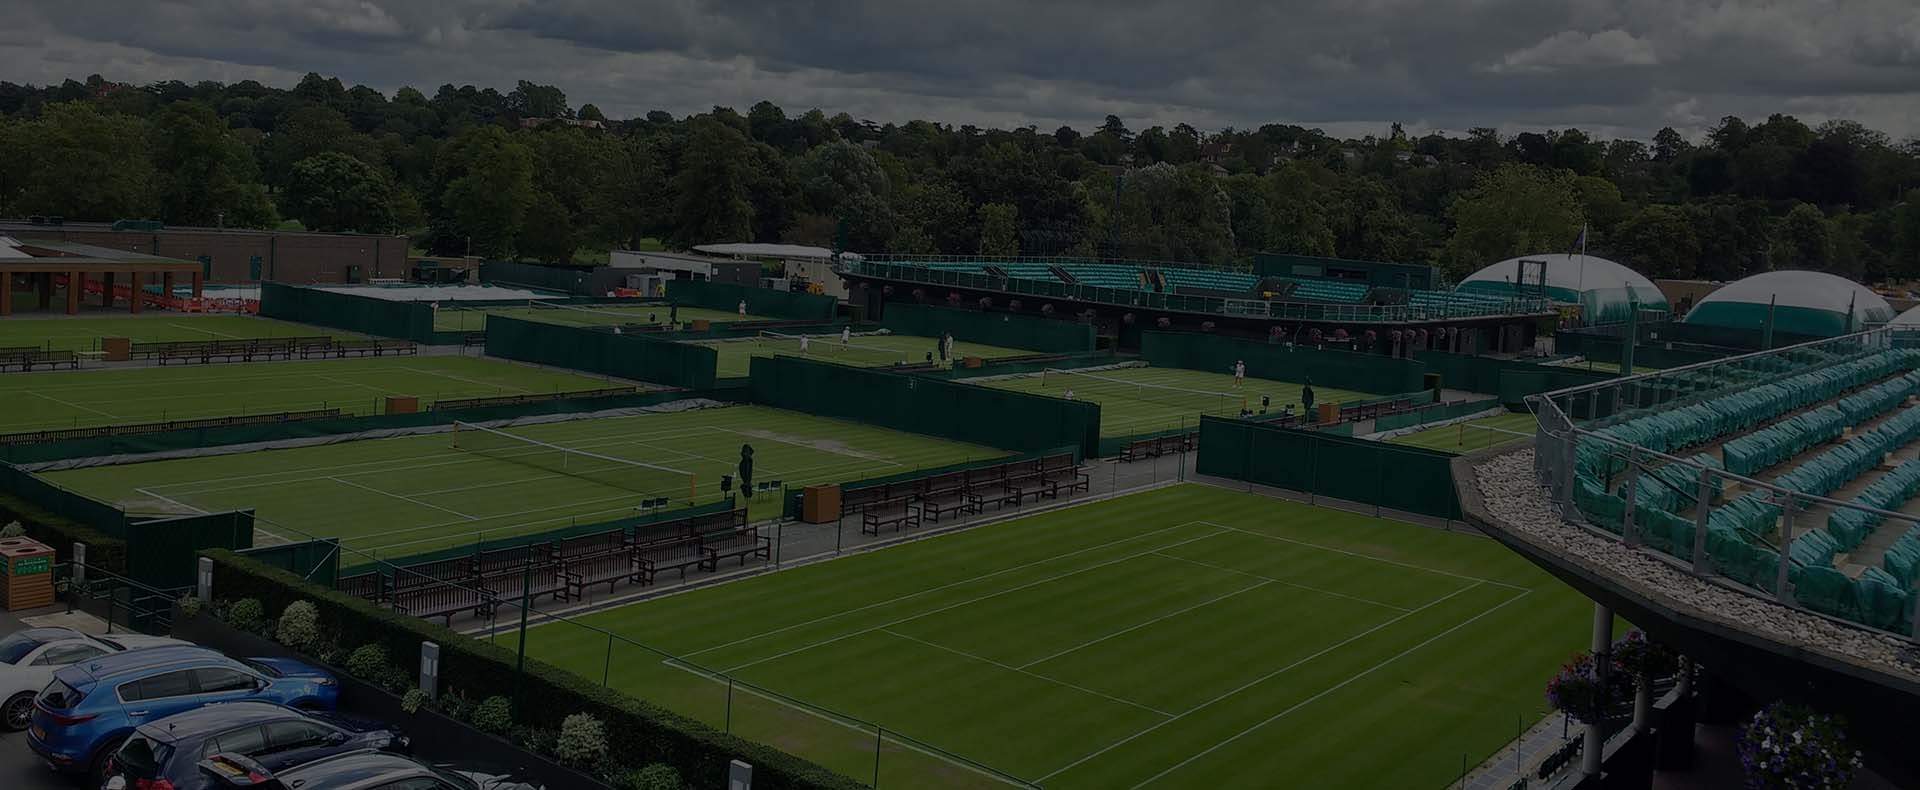 All England Lawn Tennis and Croquet Club, Wimbledon with eight gtass tennis courts and trees behind.